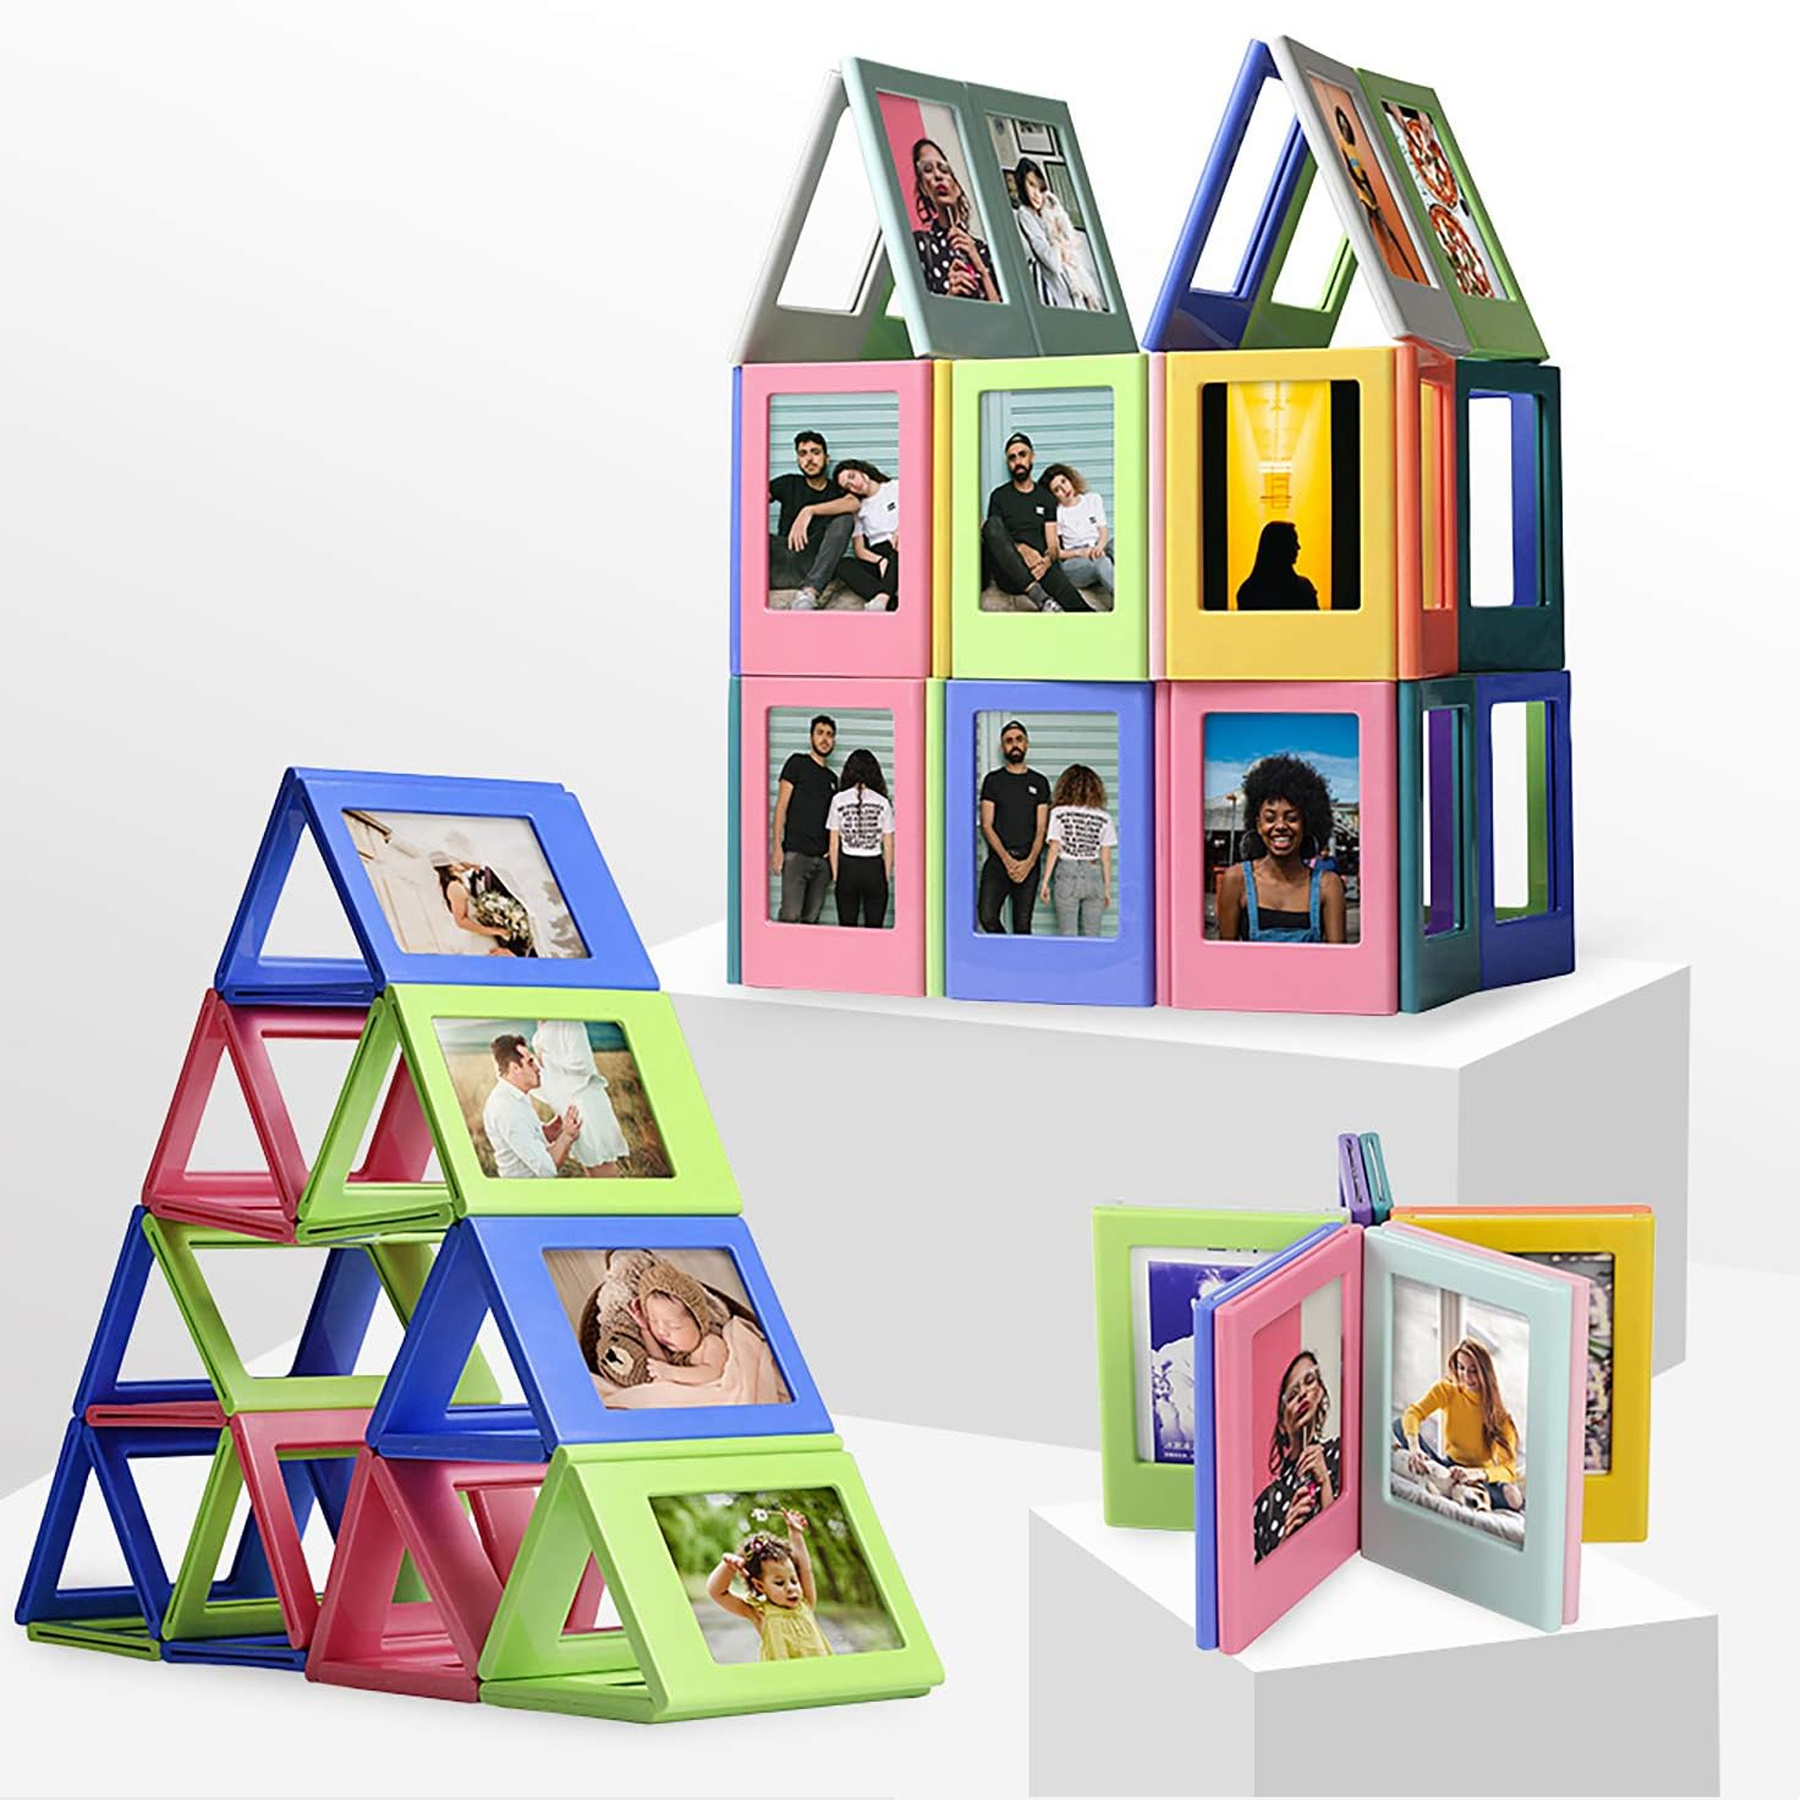 Instax Mini Photo Frames 2x3, Polaroid Picture Frame, Iridescent Acrylic  Picture Frames for Desktop & Tabletop, Mini Instant Photo Frames for  Fujifilm